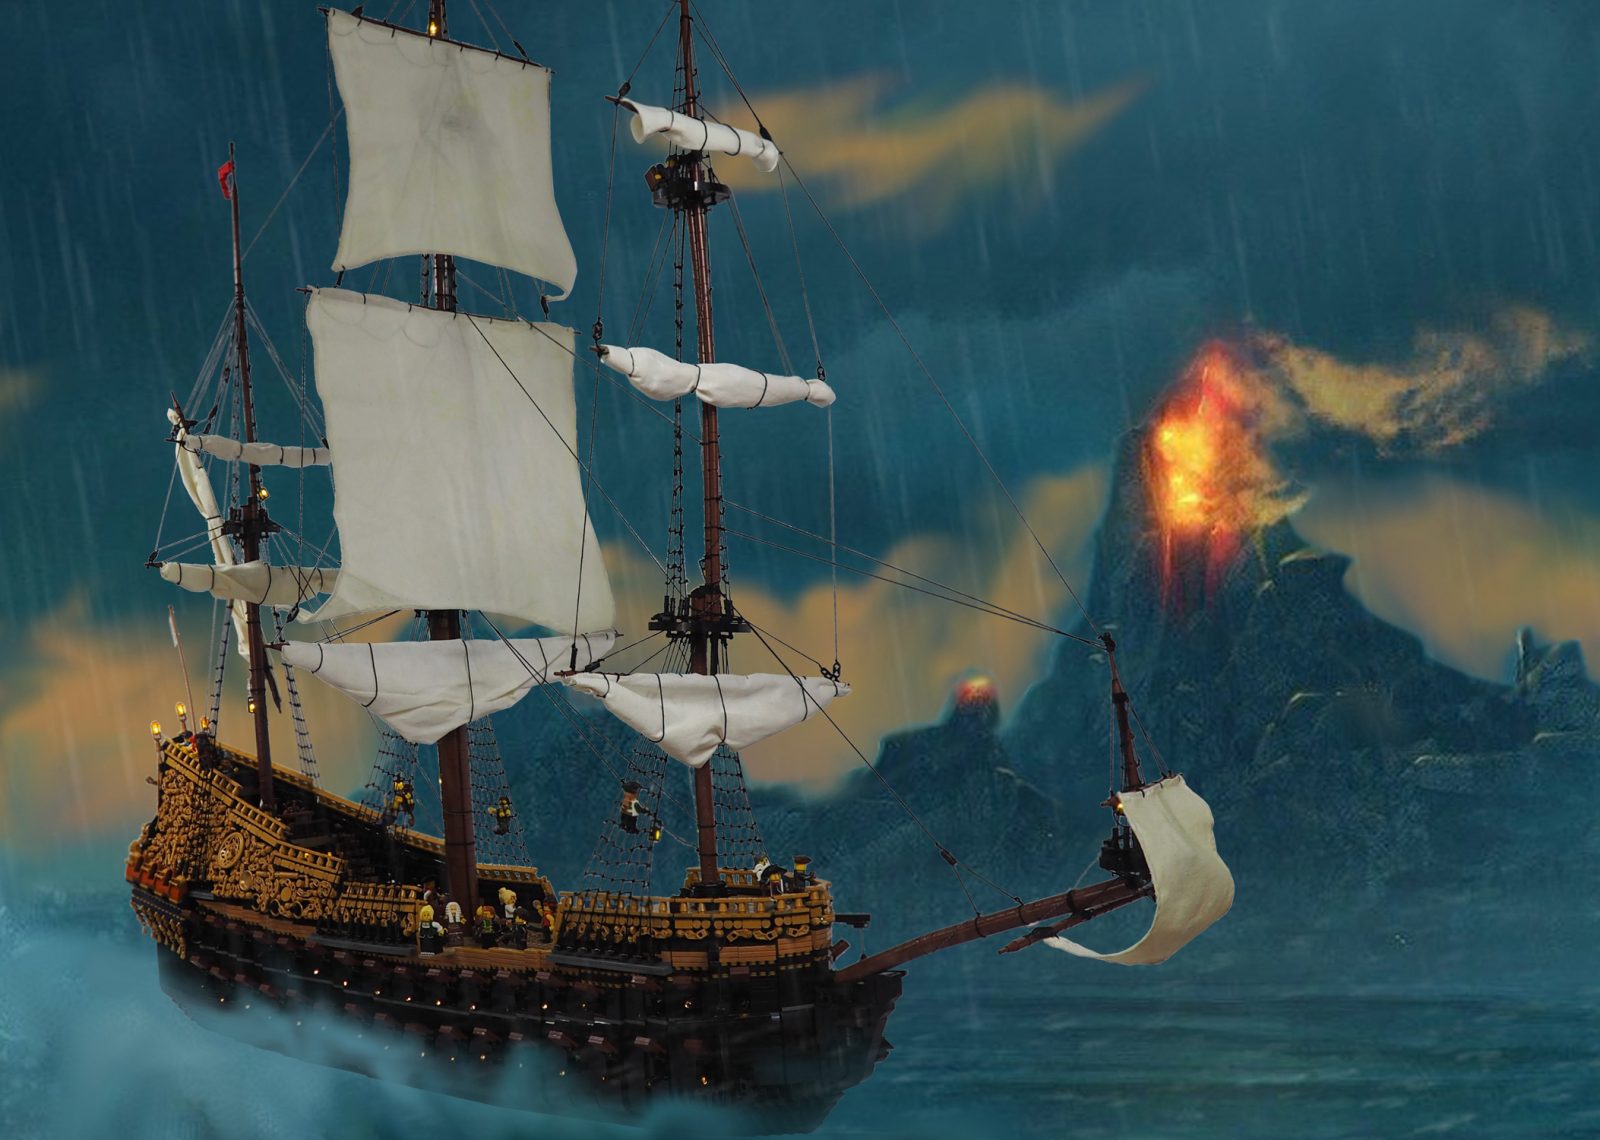 Featured image for "The Buccaneer's Dread" by Garmadon